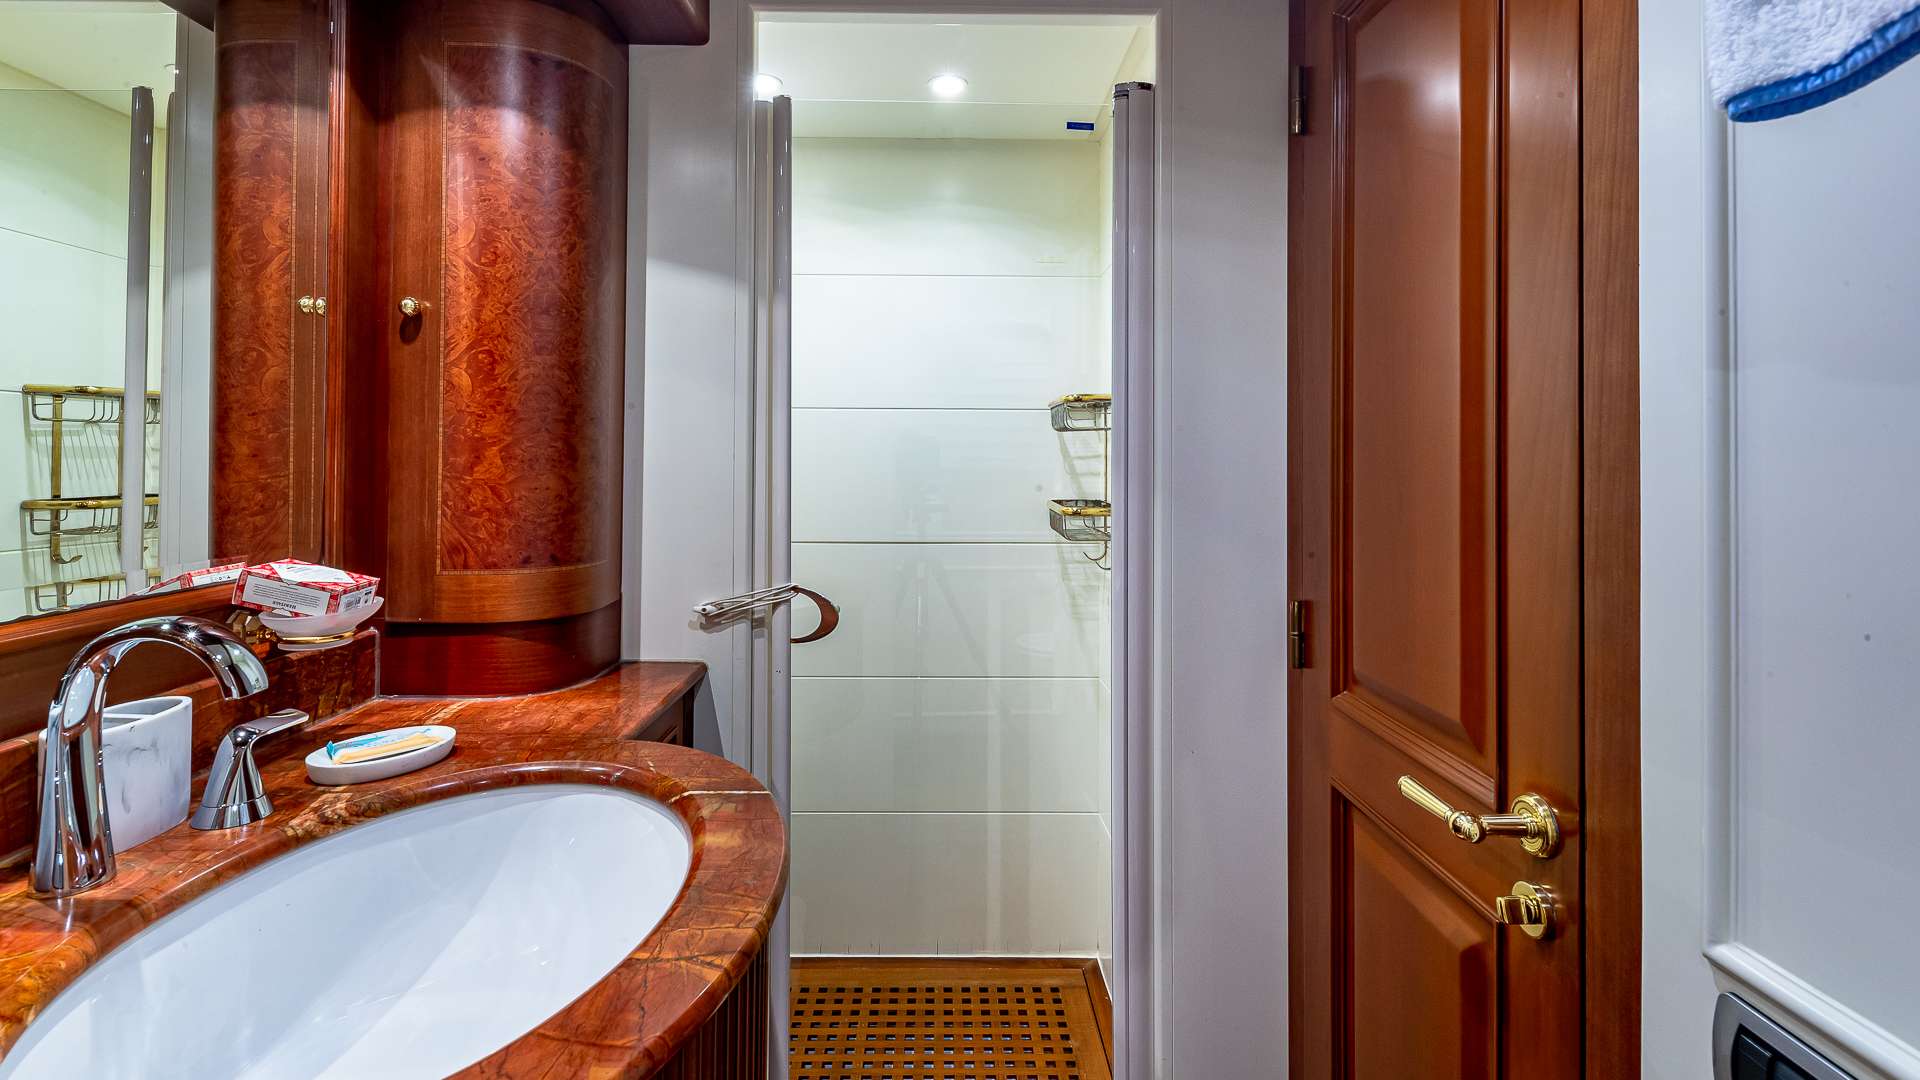 POUR ANOTHER Yacht Charter - guest bath